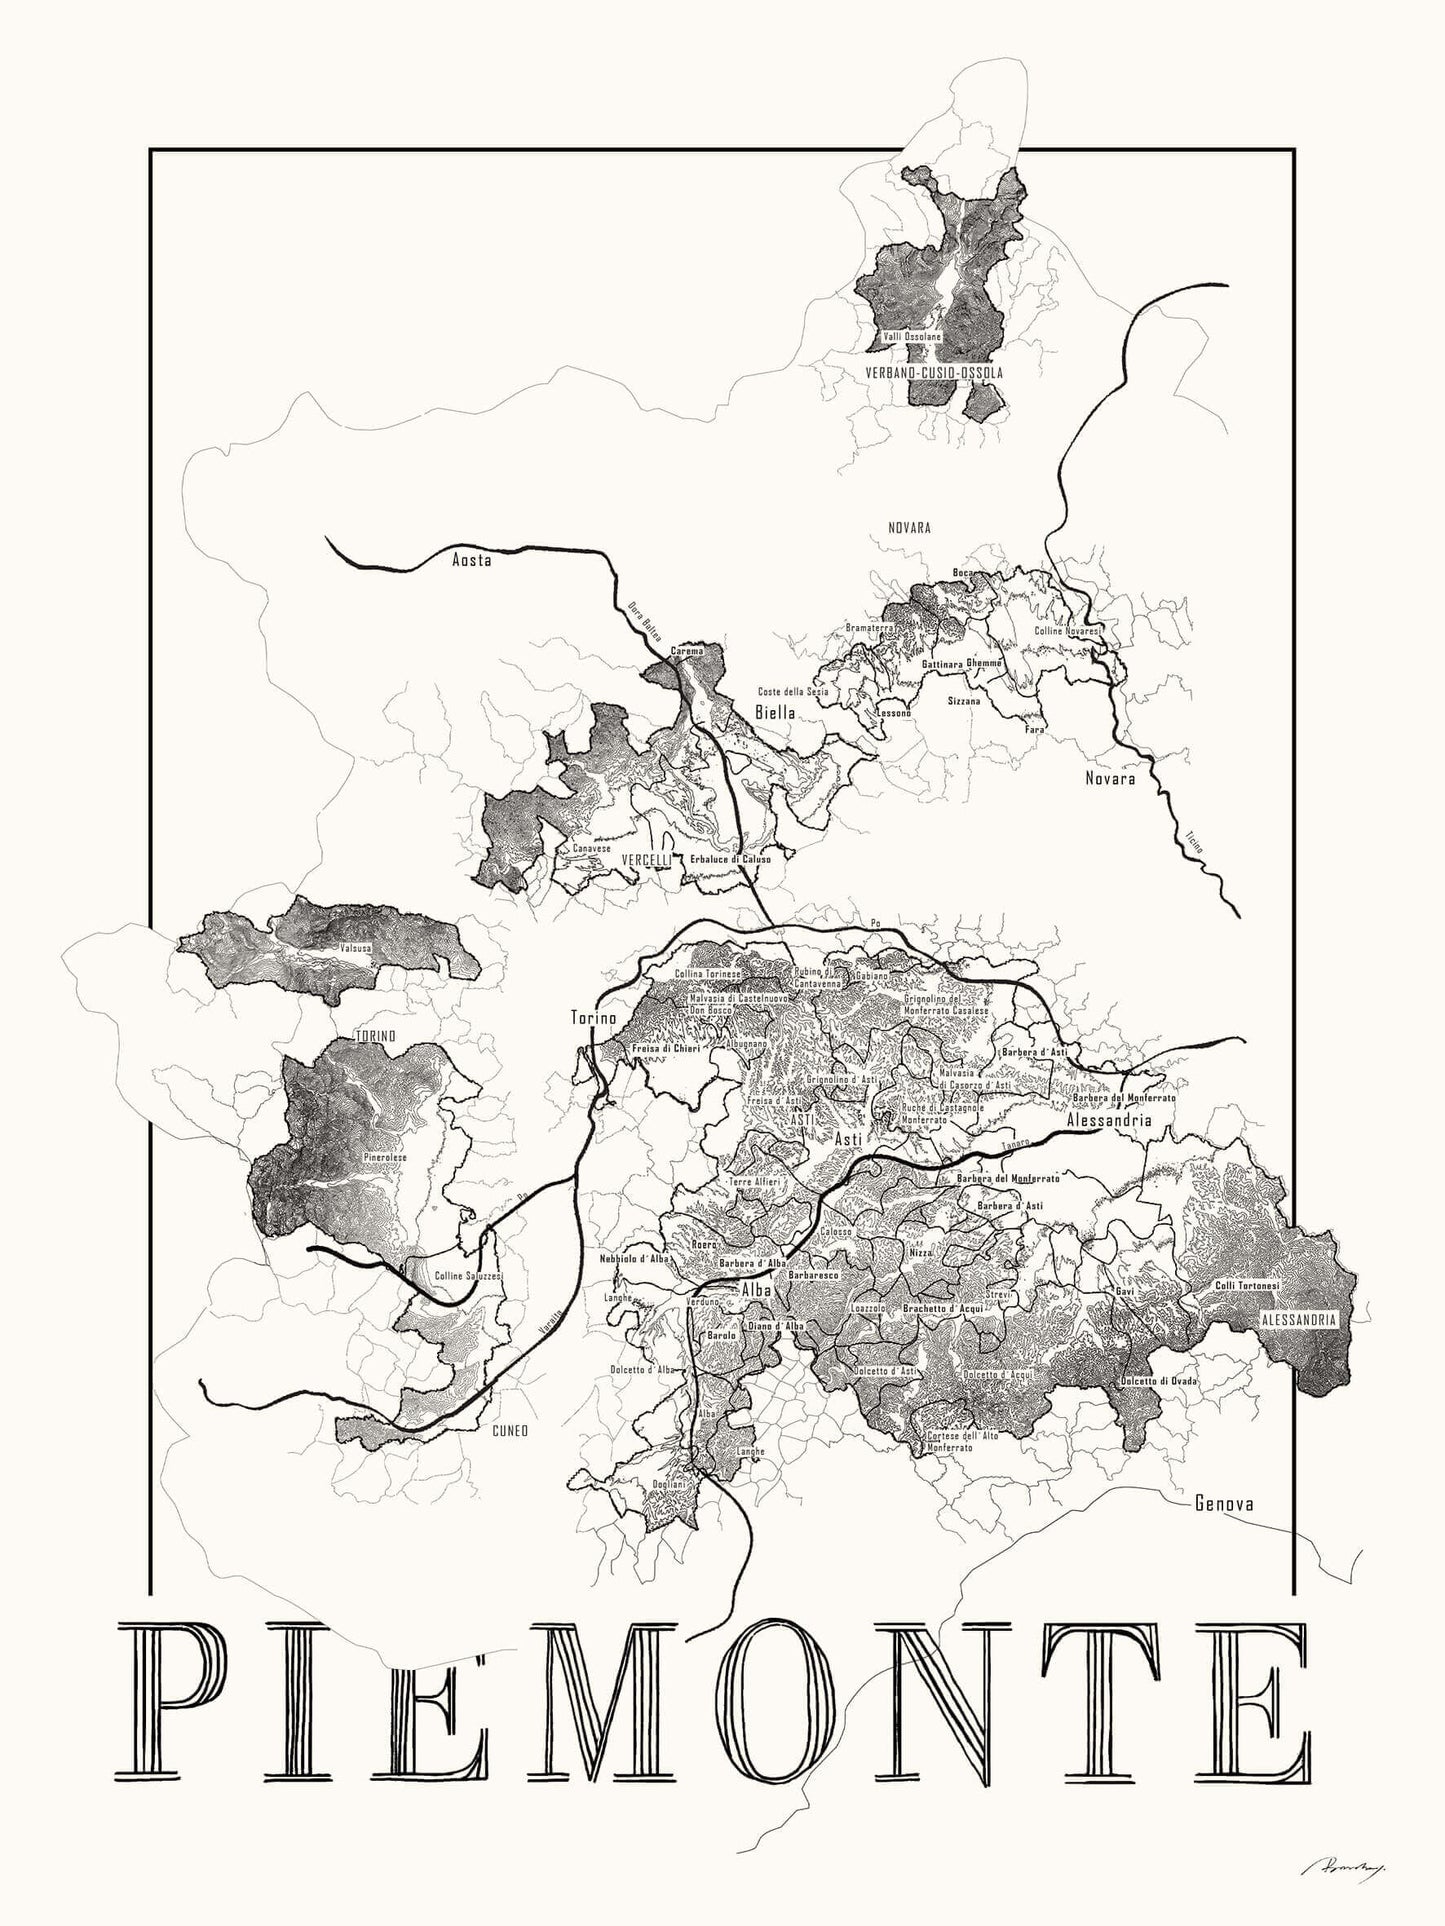 Piemonte Wine map poster. Exclusive wine map posters. Premium quality wine maps printed on environmentally friendly FSC marked paper. 